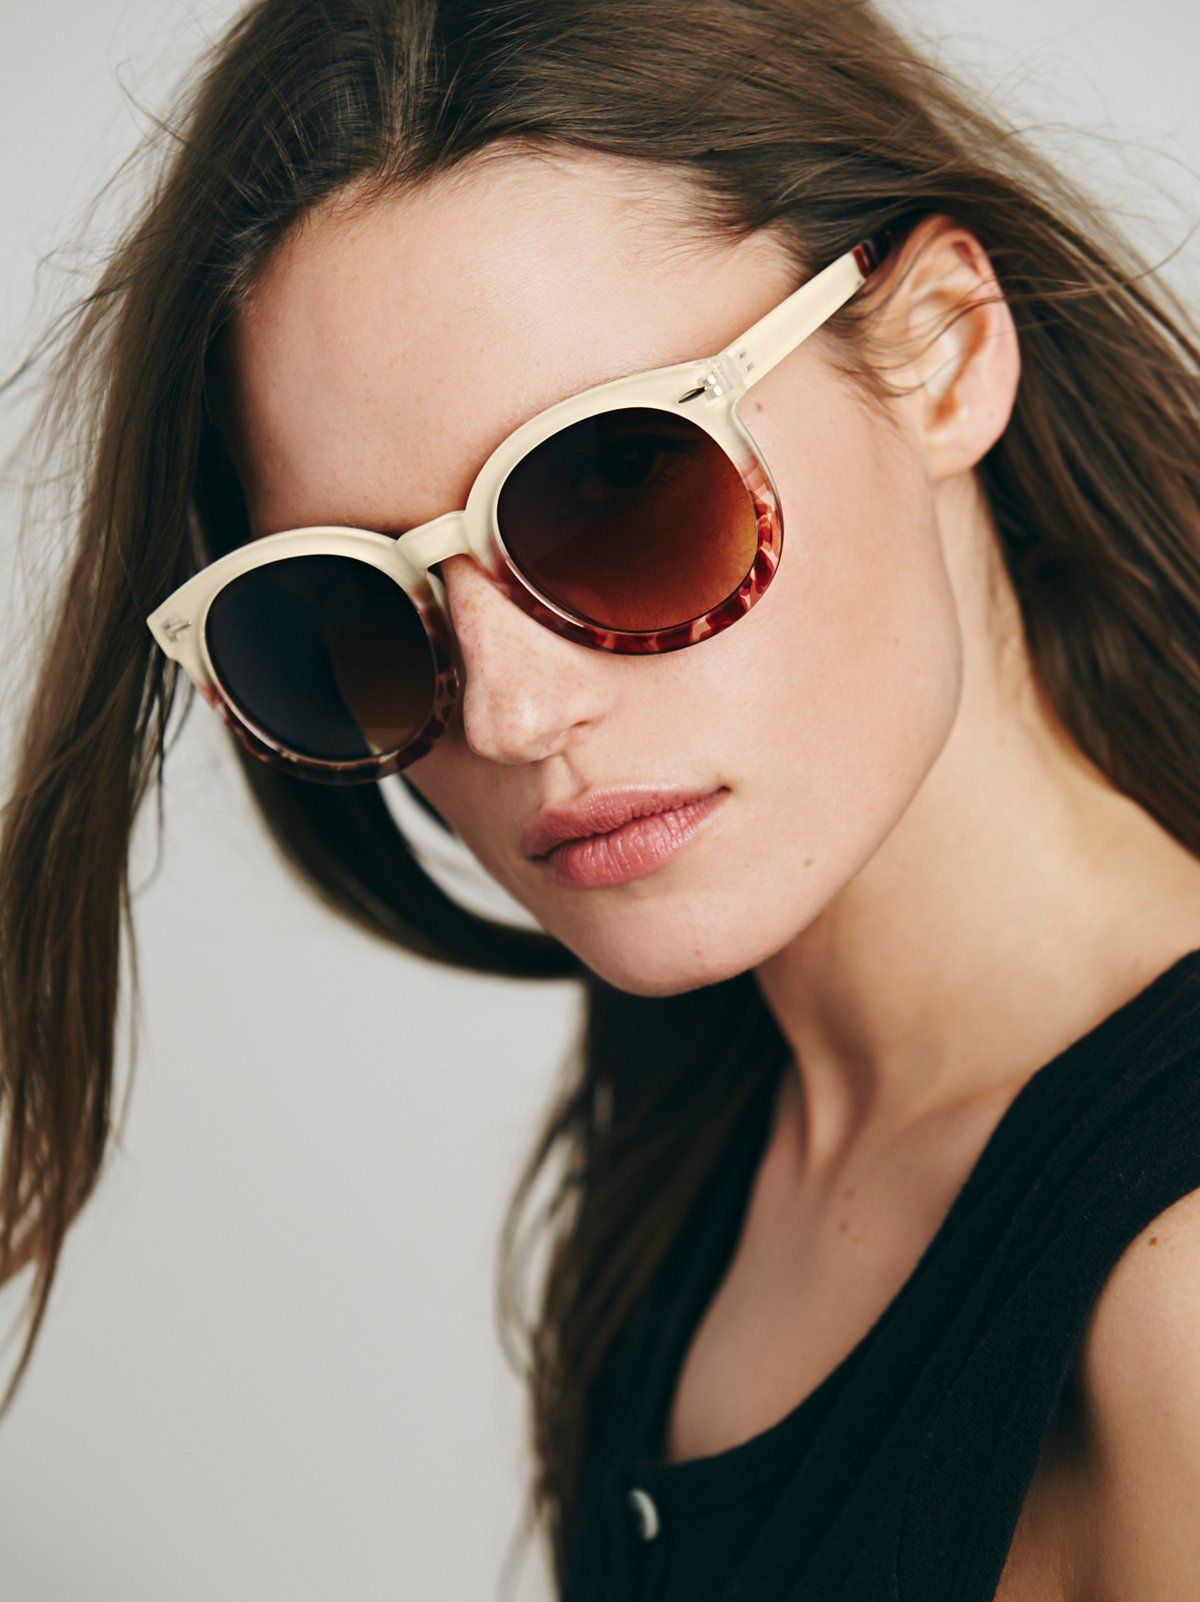 Two-Tone Abbey Road Sunglasses | Free People